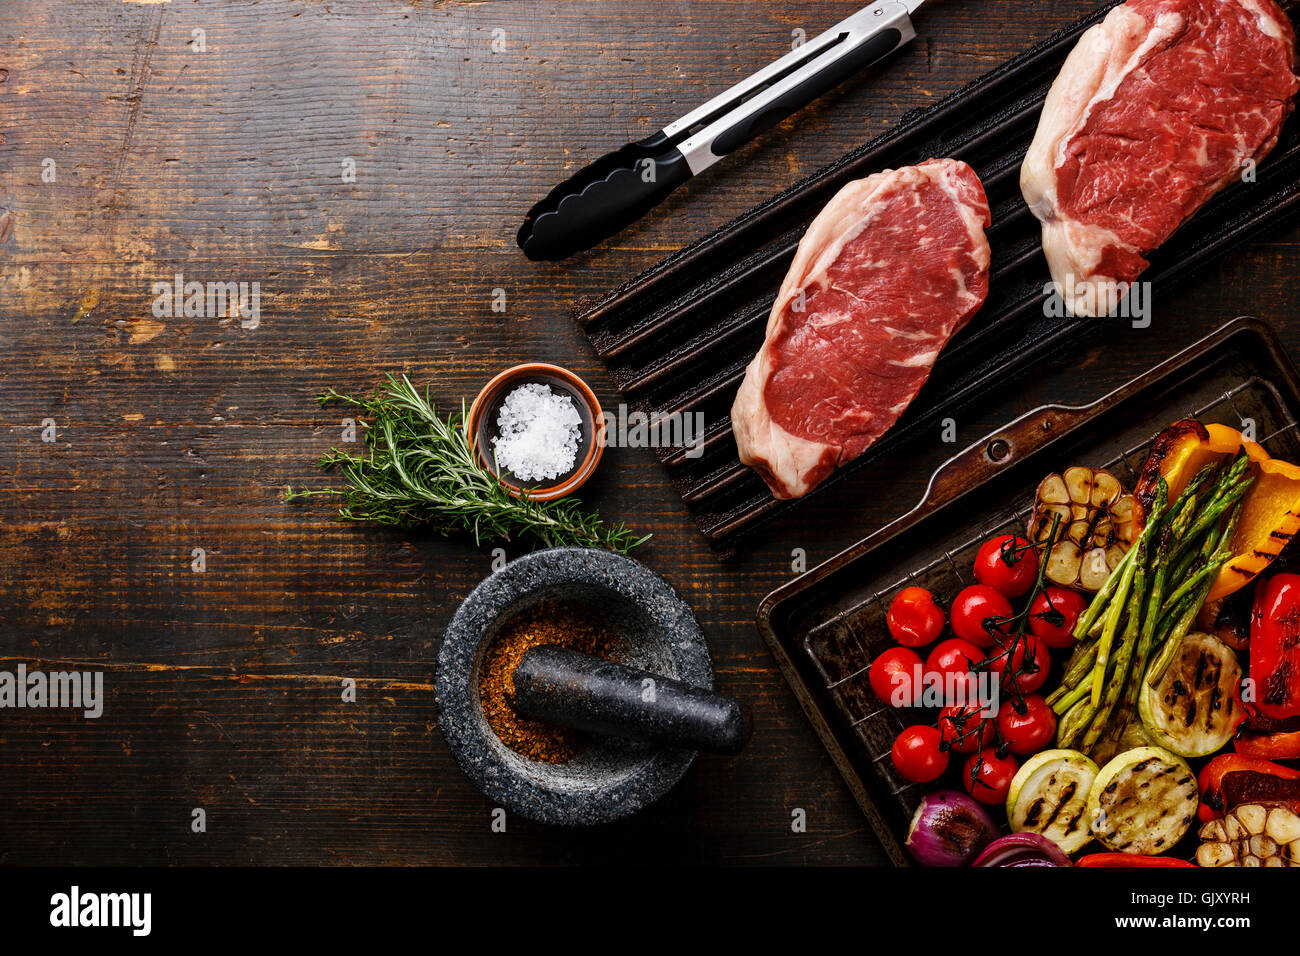 Raw fresh meat Steak Striploin on black cast iron grill and Grilled vegetables on wooden background Stock Photo